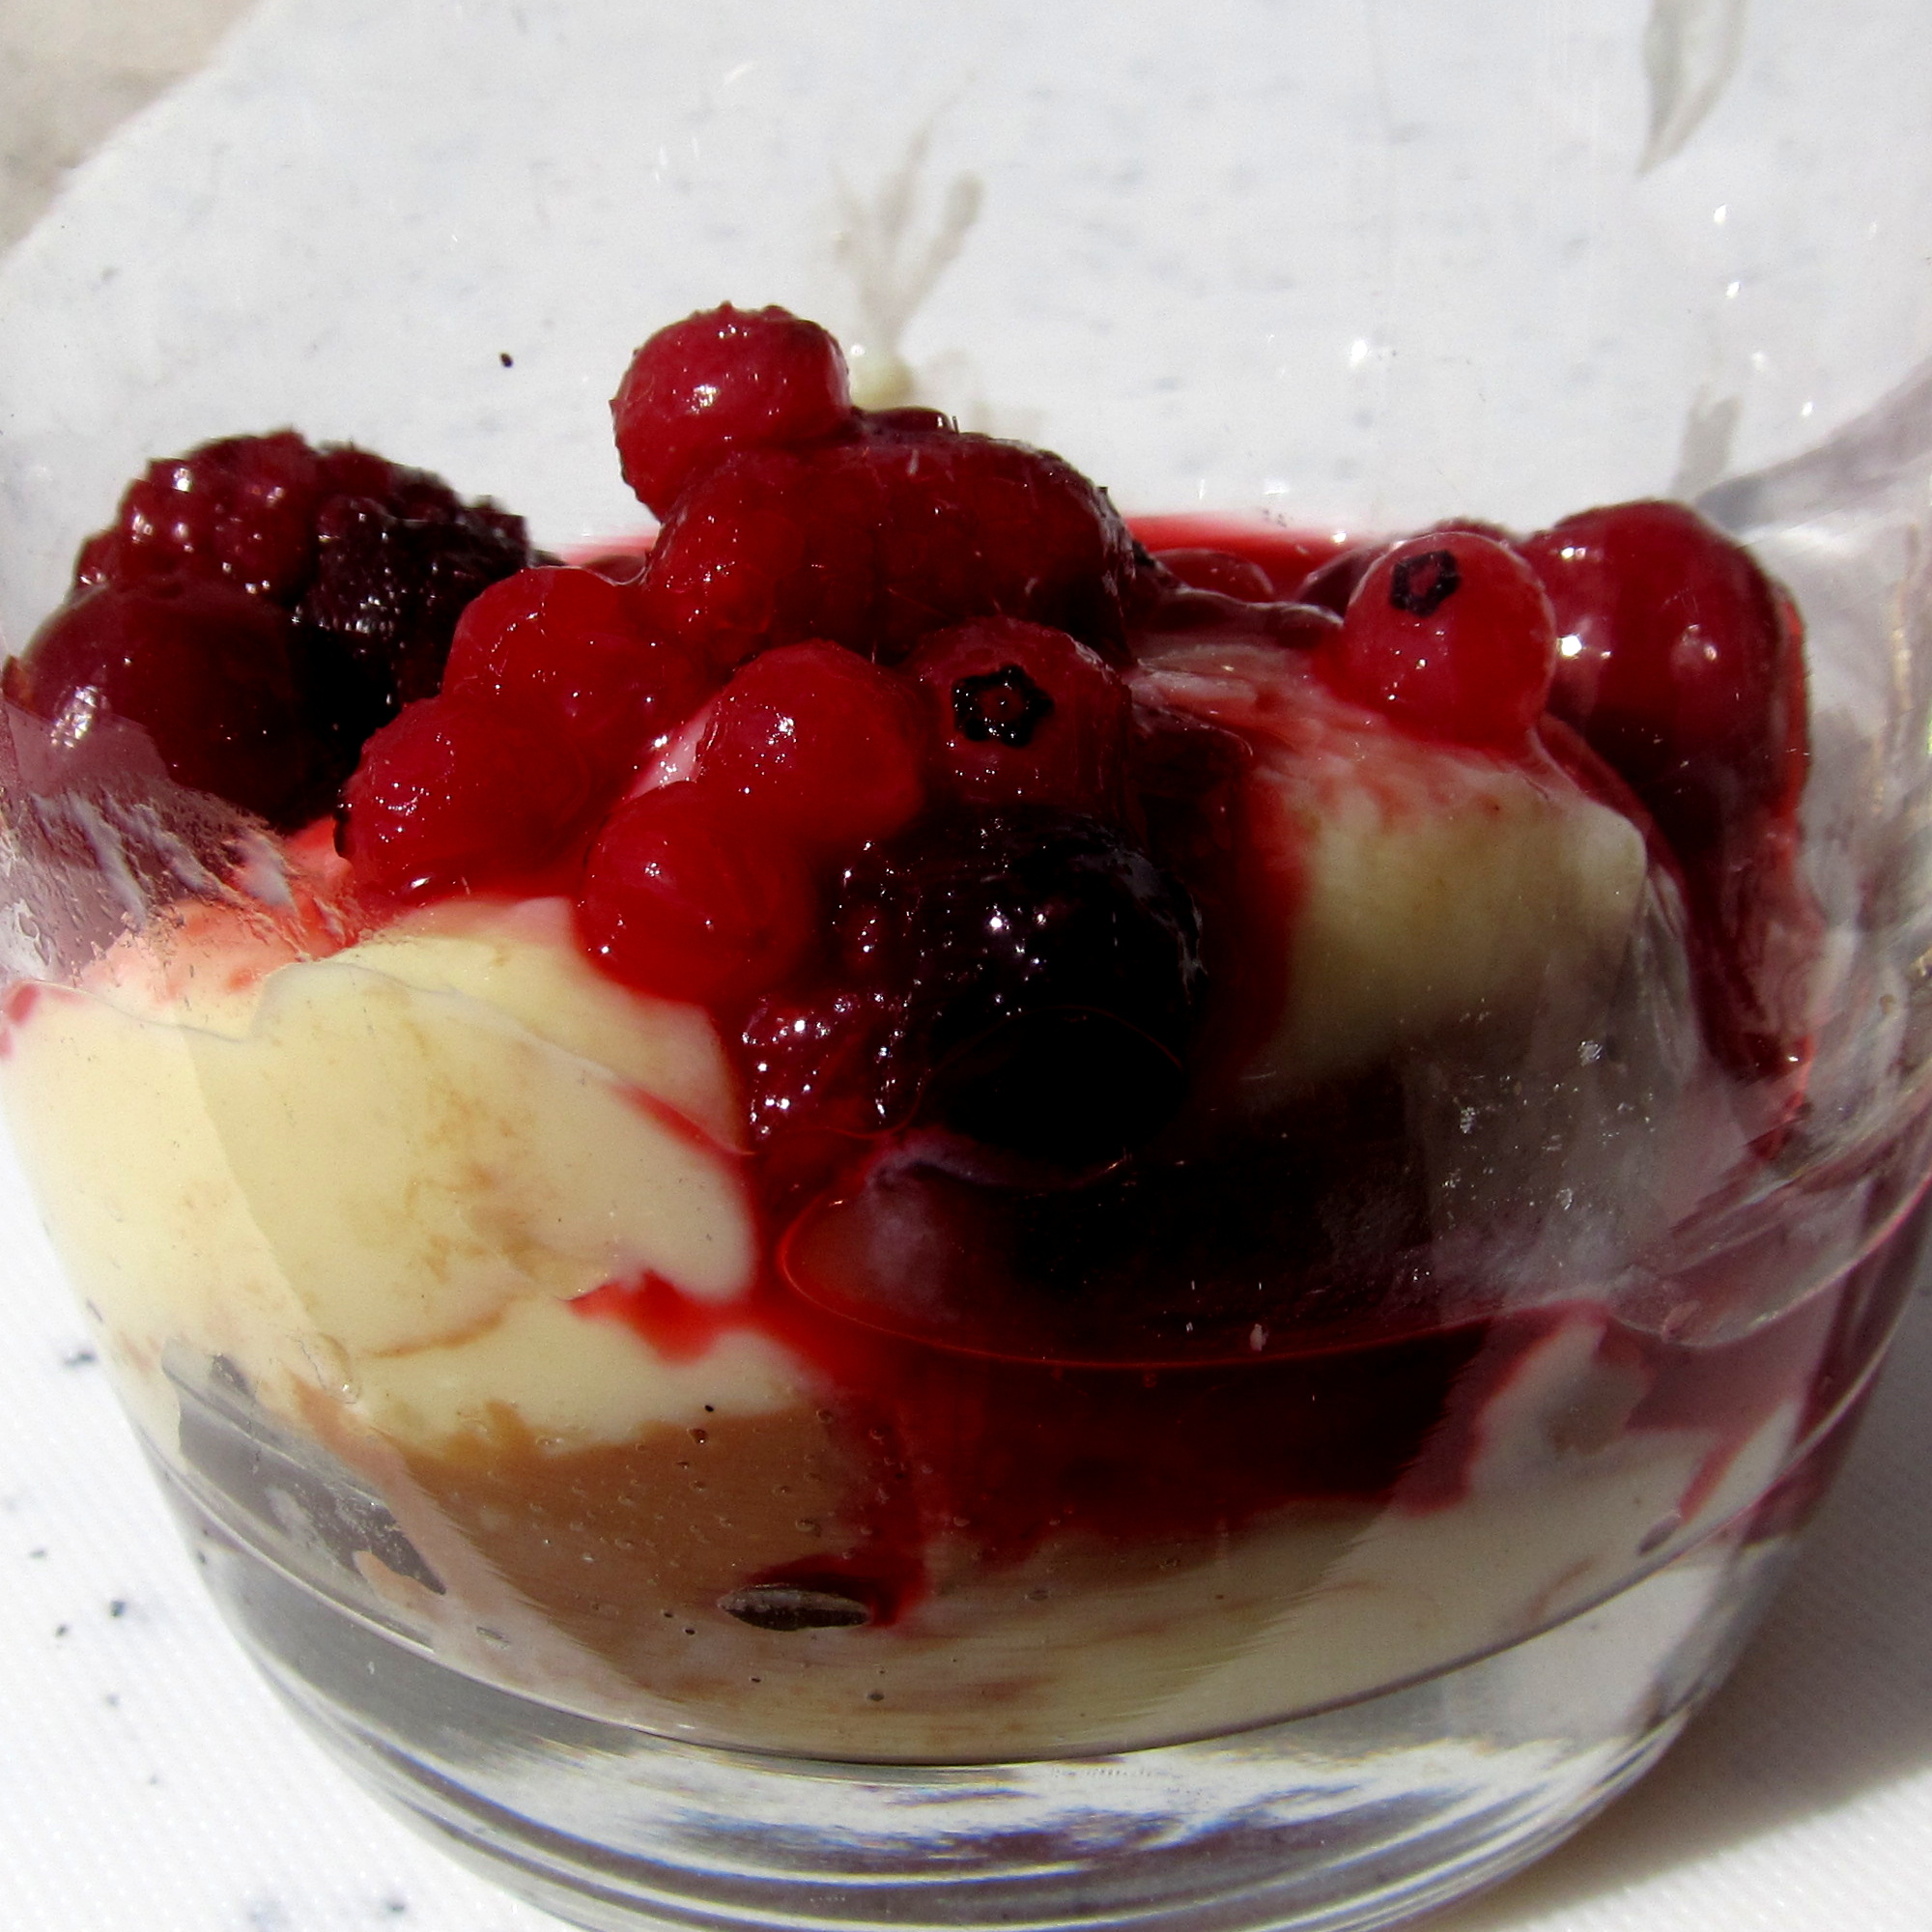 Berry-based fruit compote